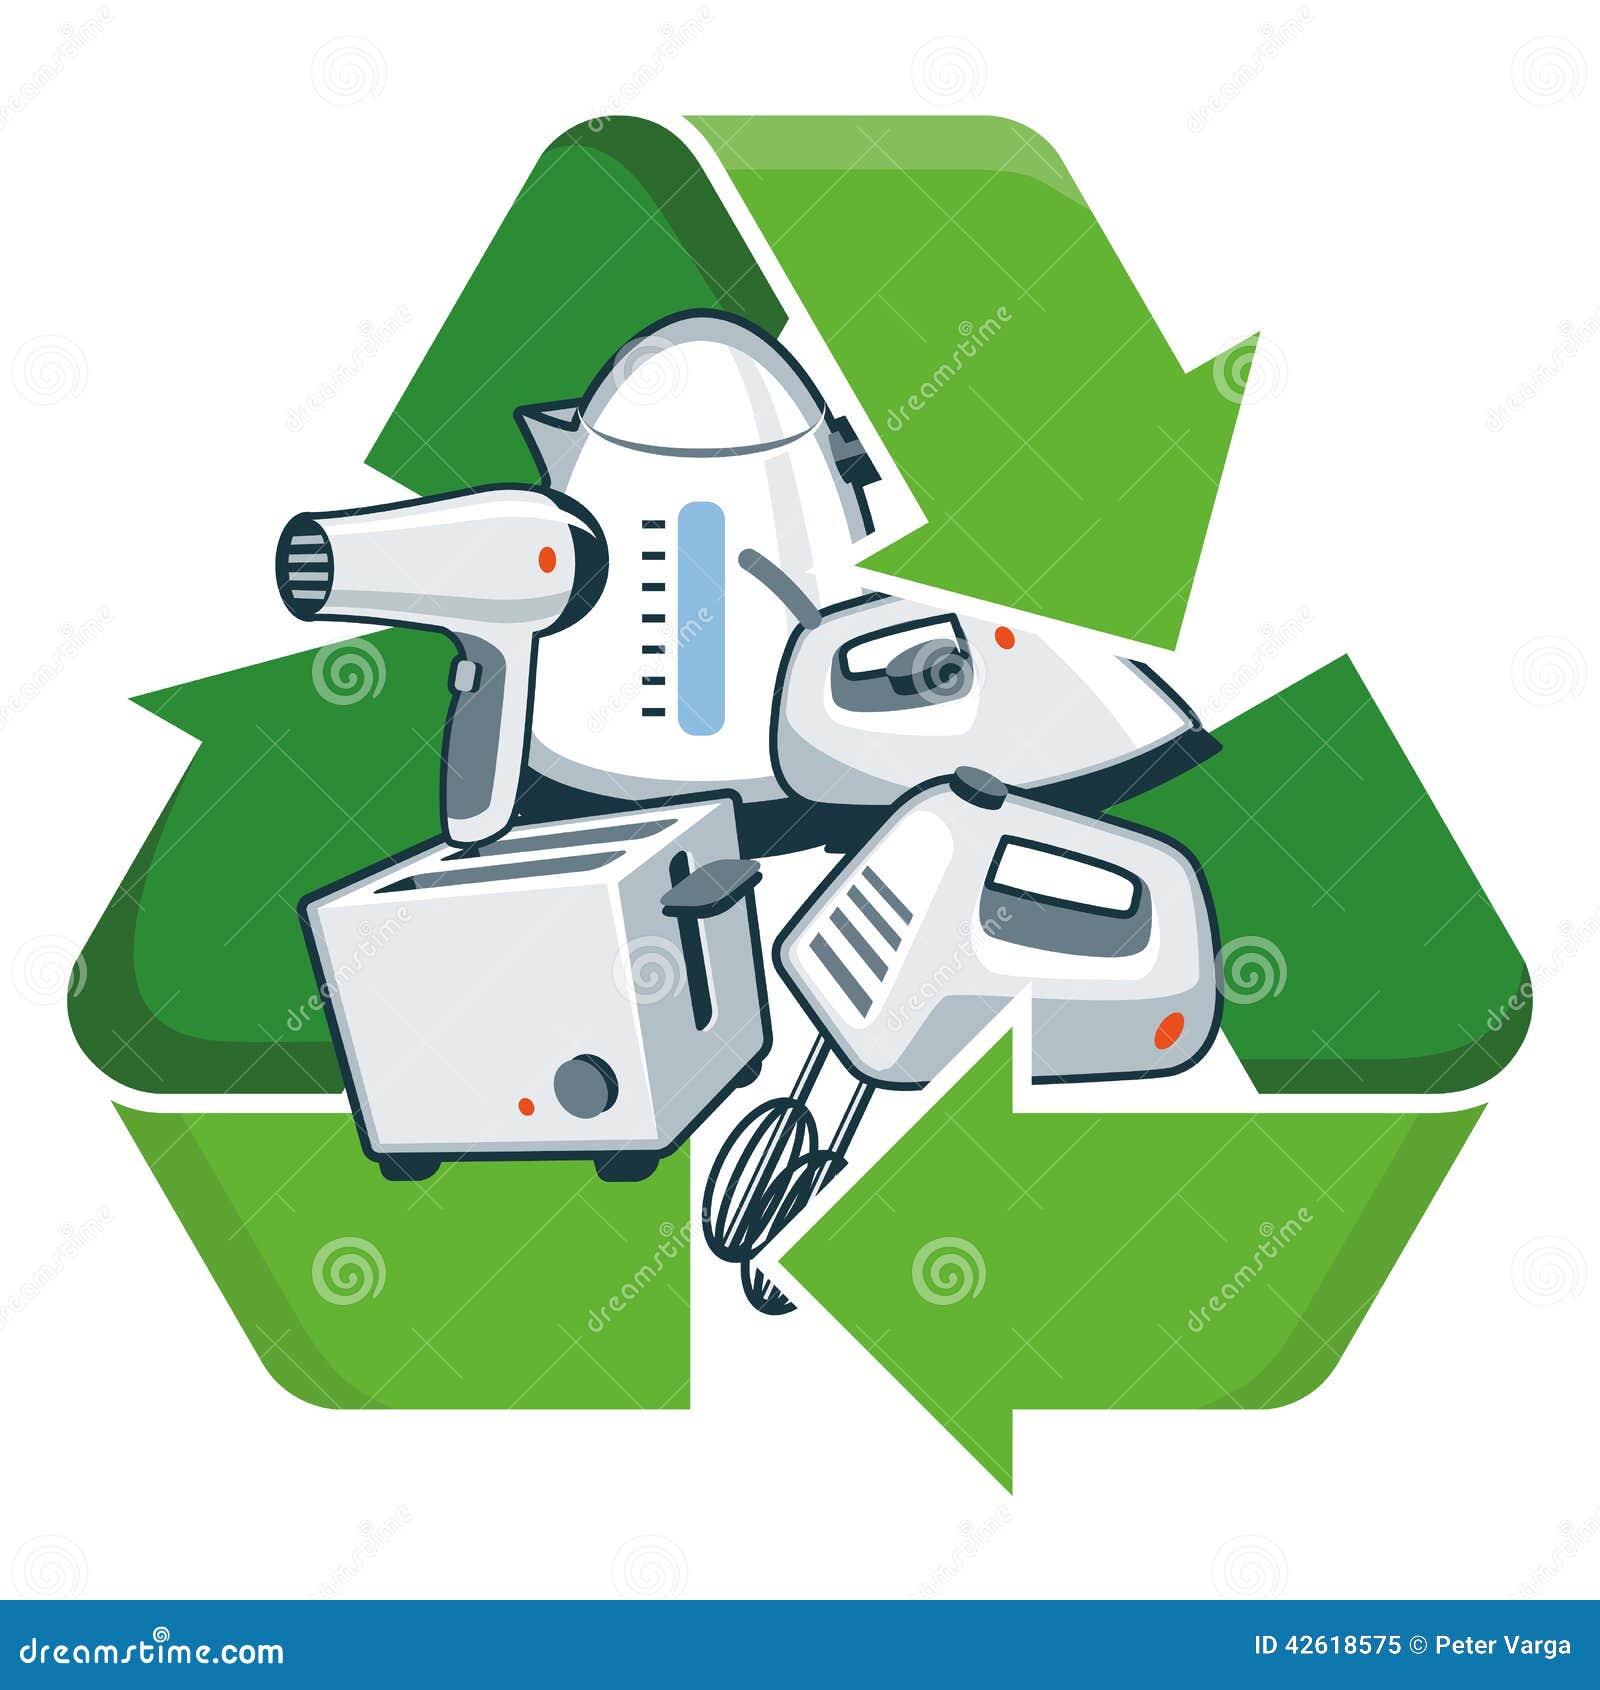 recycle small electronic appliances